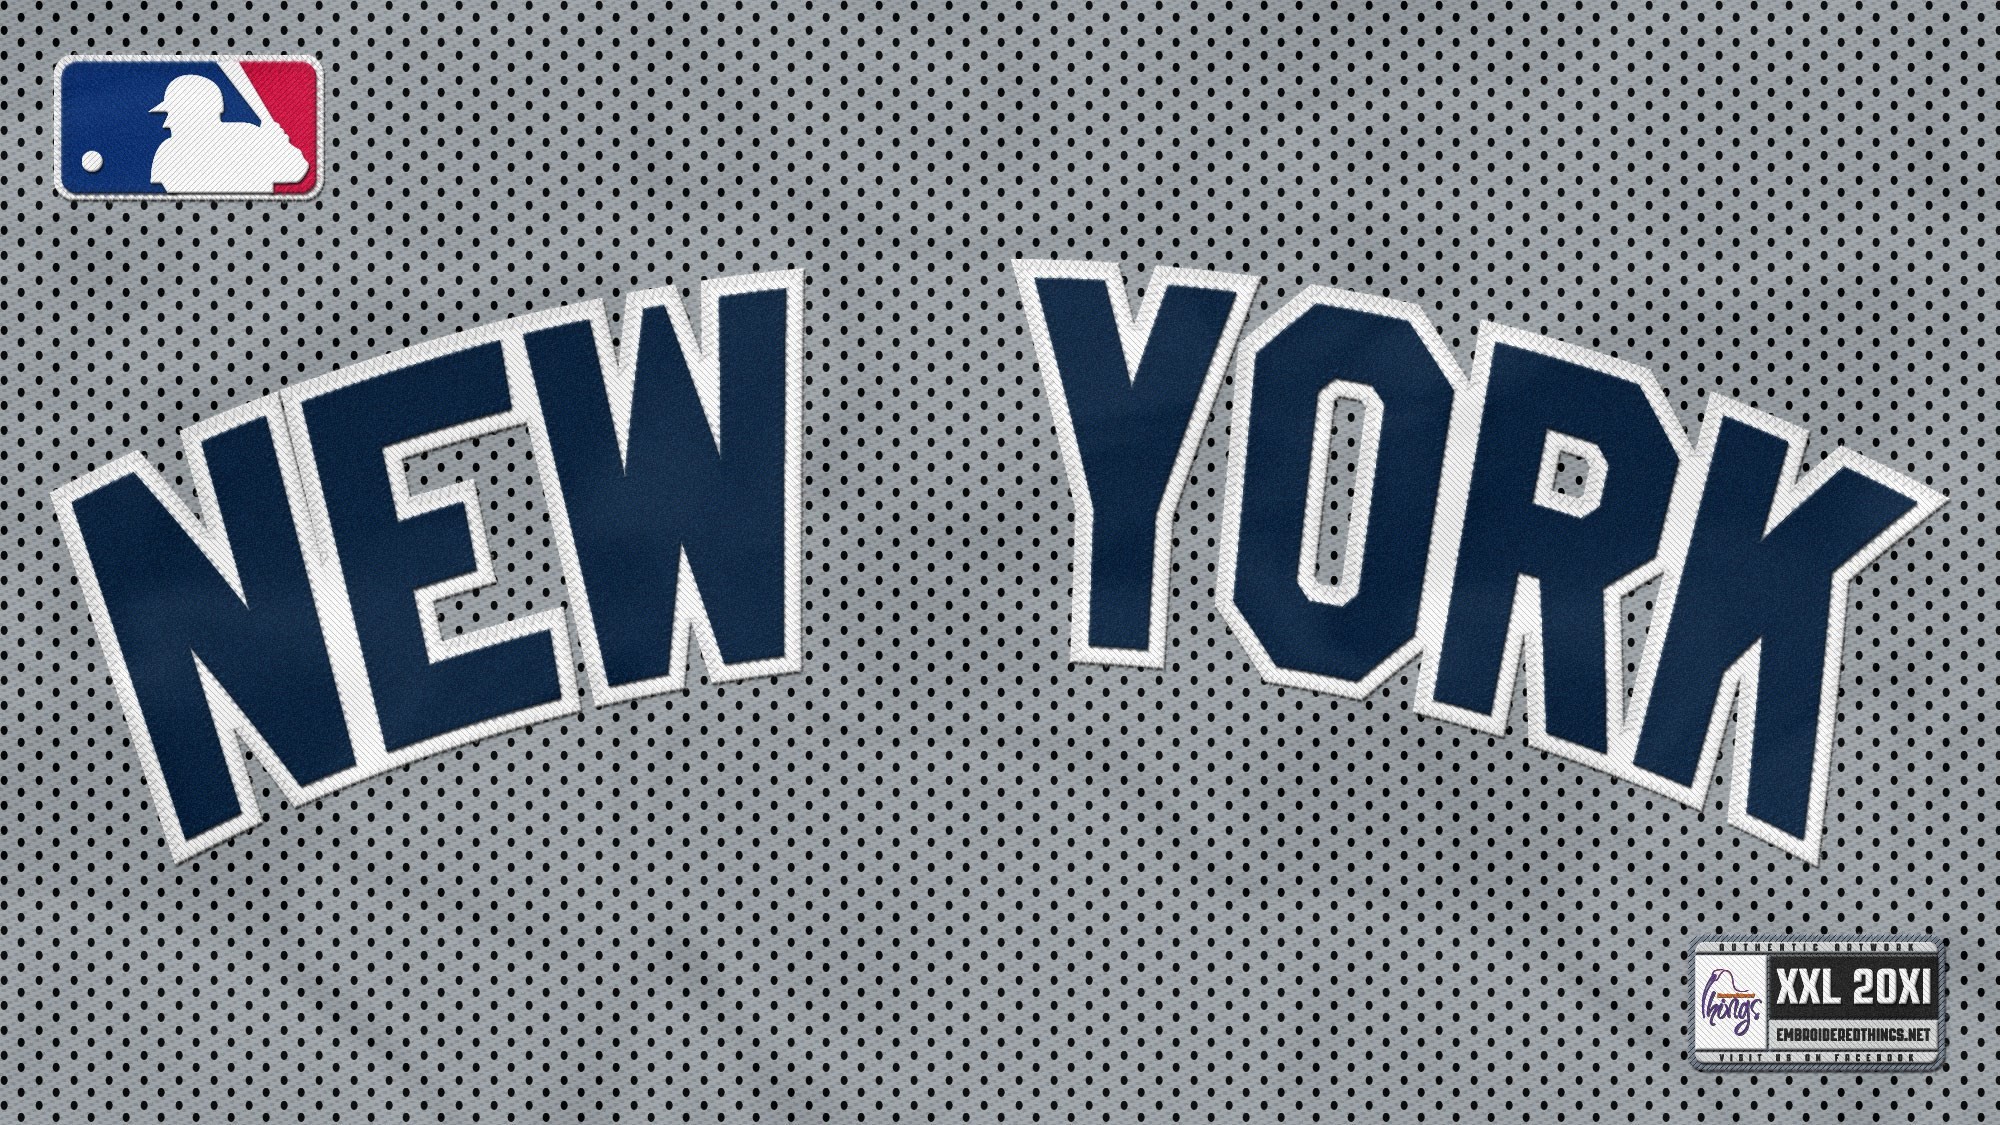 2000x1125 px new york yankees computer desktop backgrounds by Sonny Jacobson